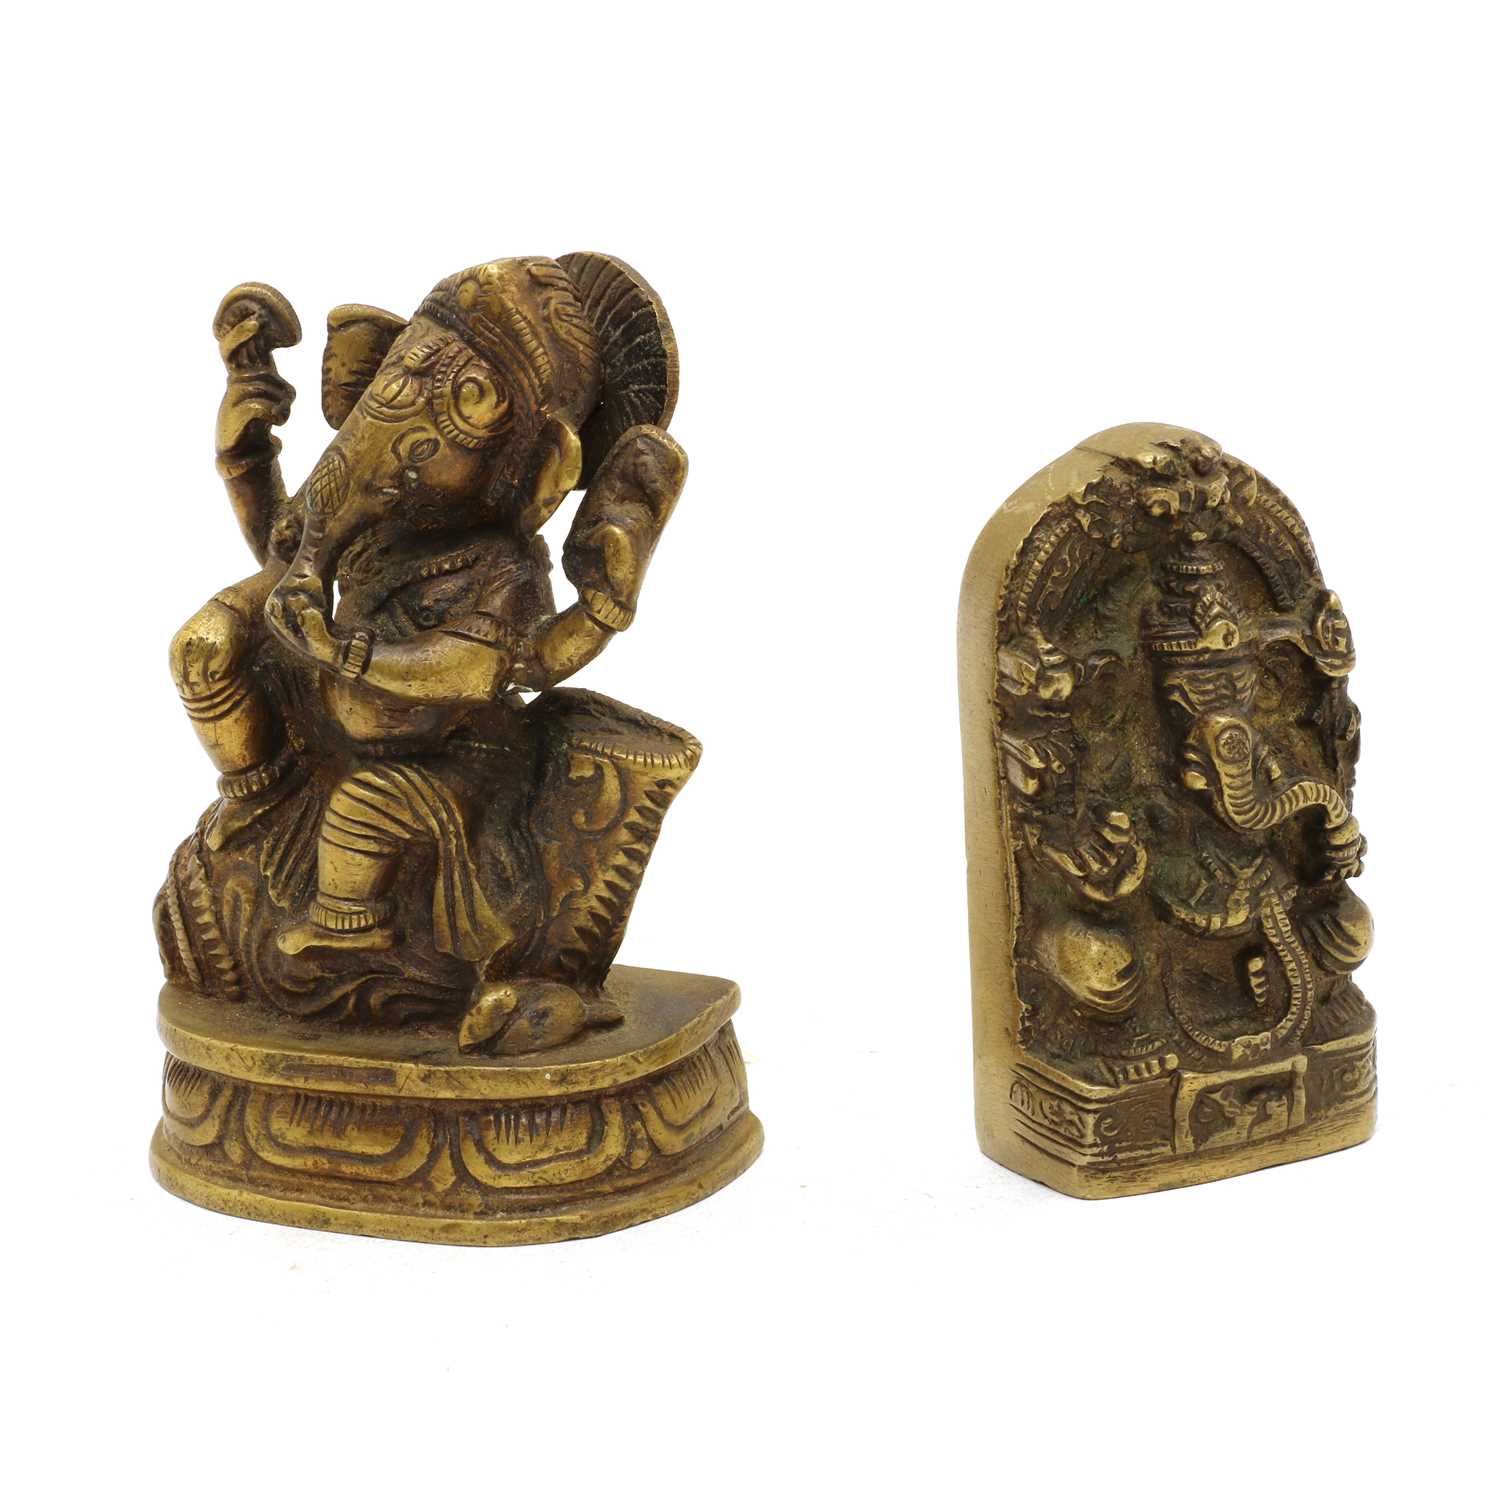 Two North Indian/Nepalese bronzes,